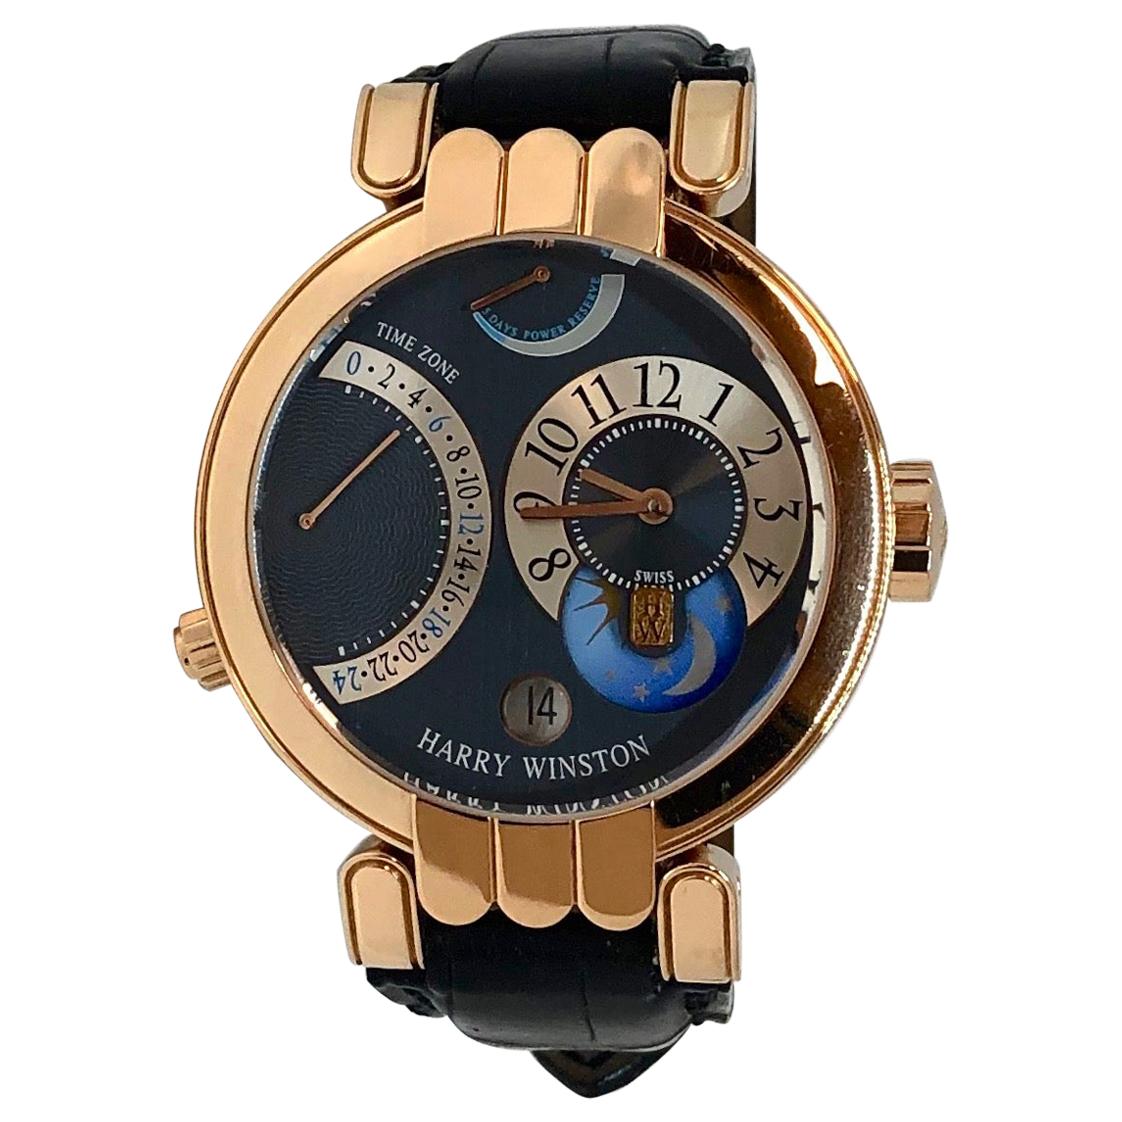 Harry Winston Premier Excenter Timezone 015619 Rose Gold Moonphase Watch